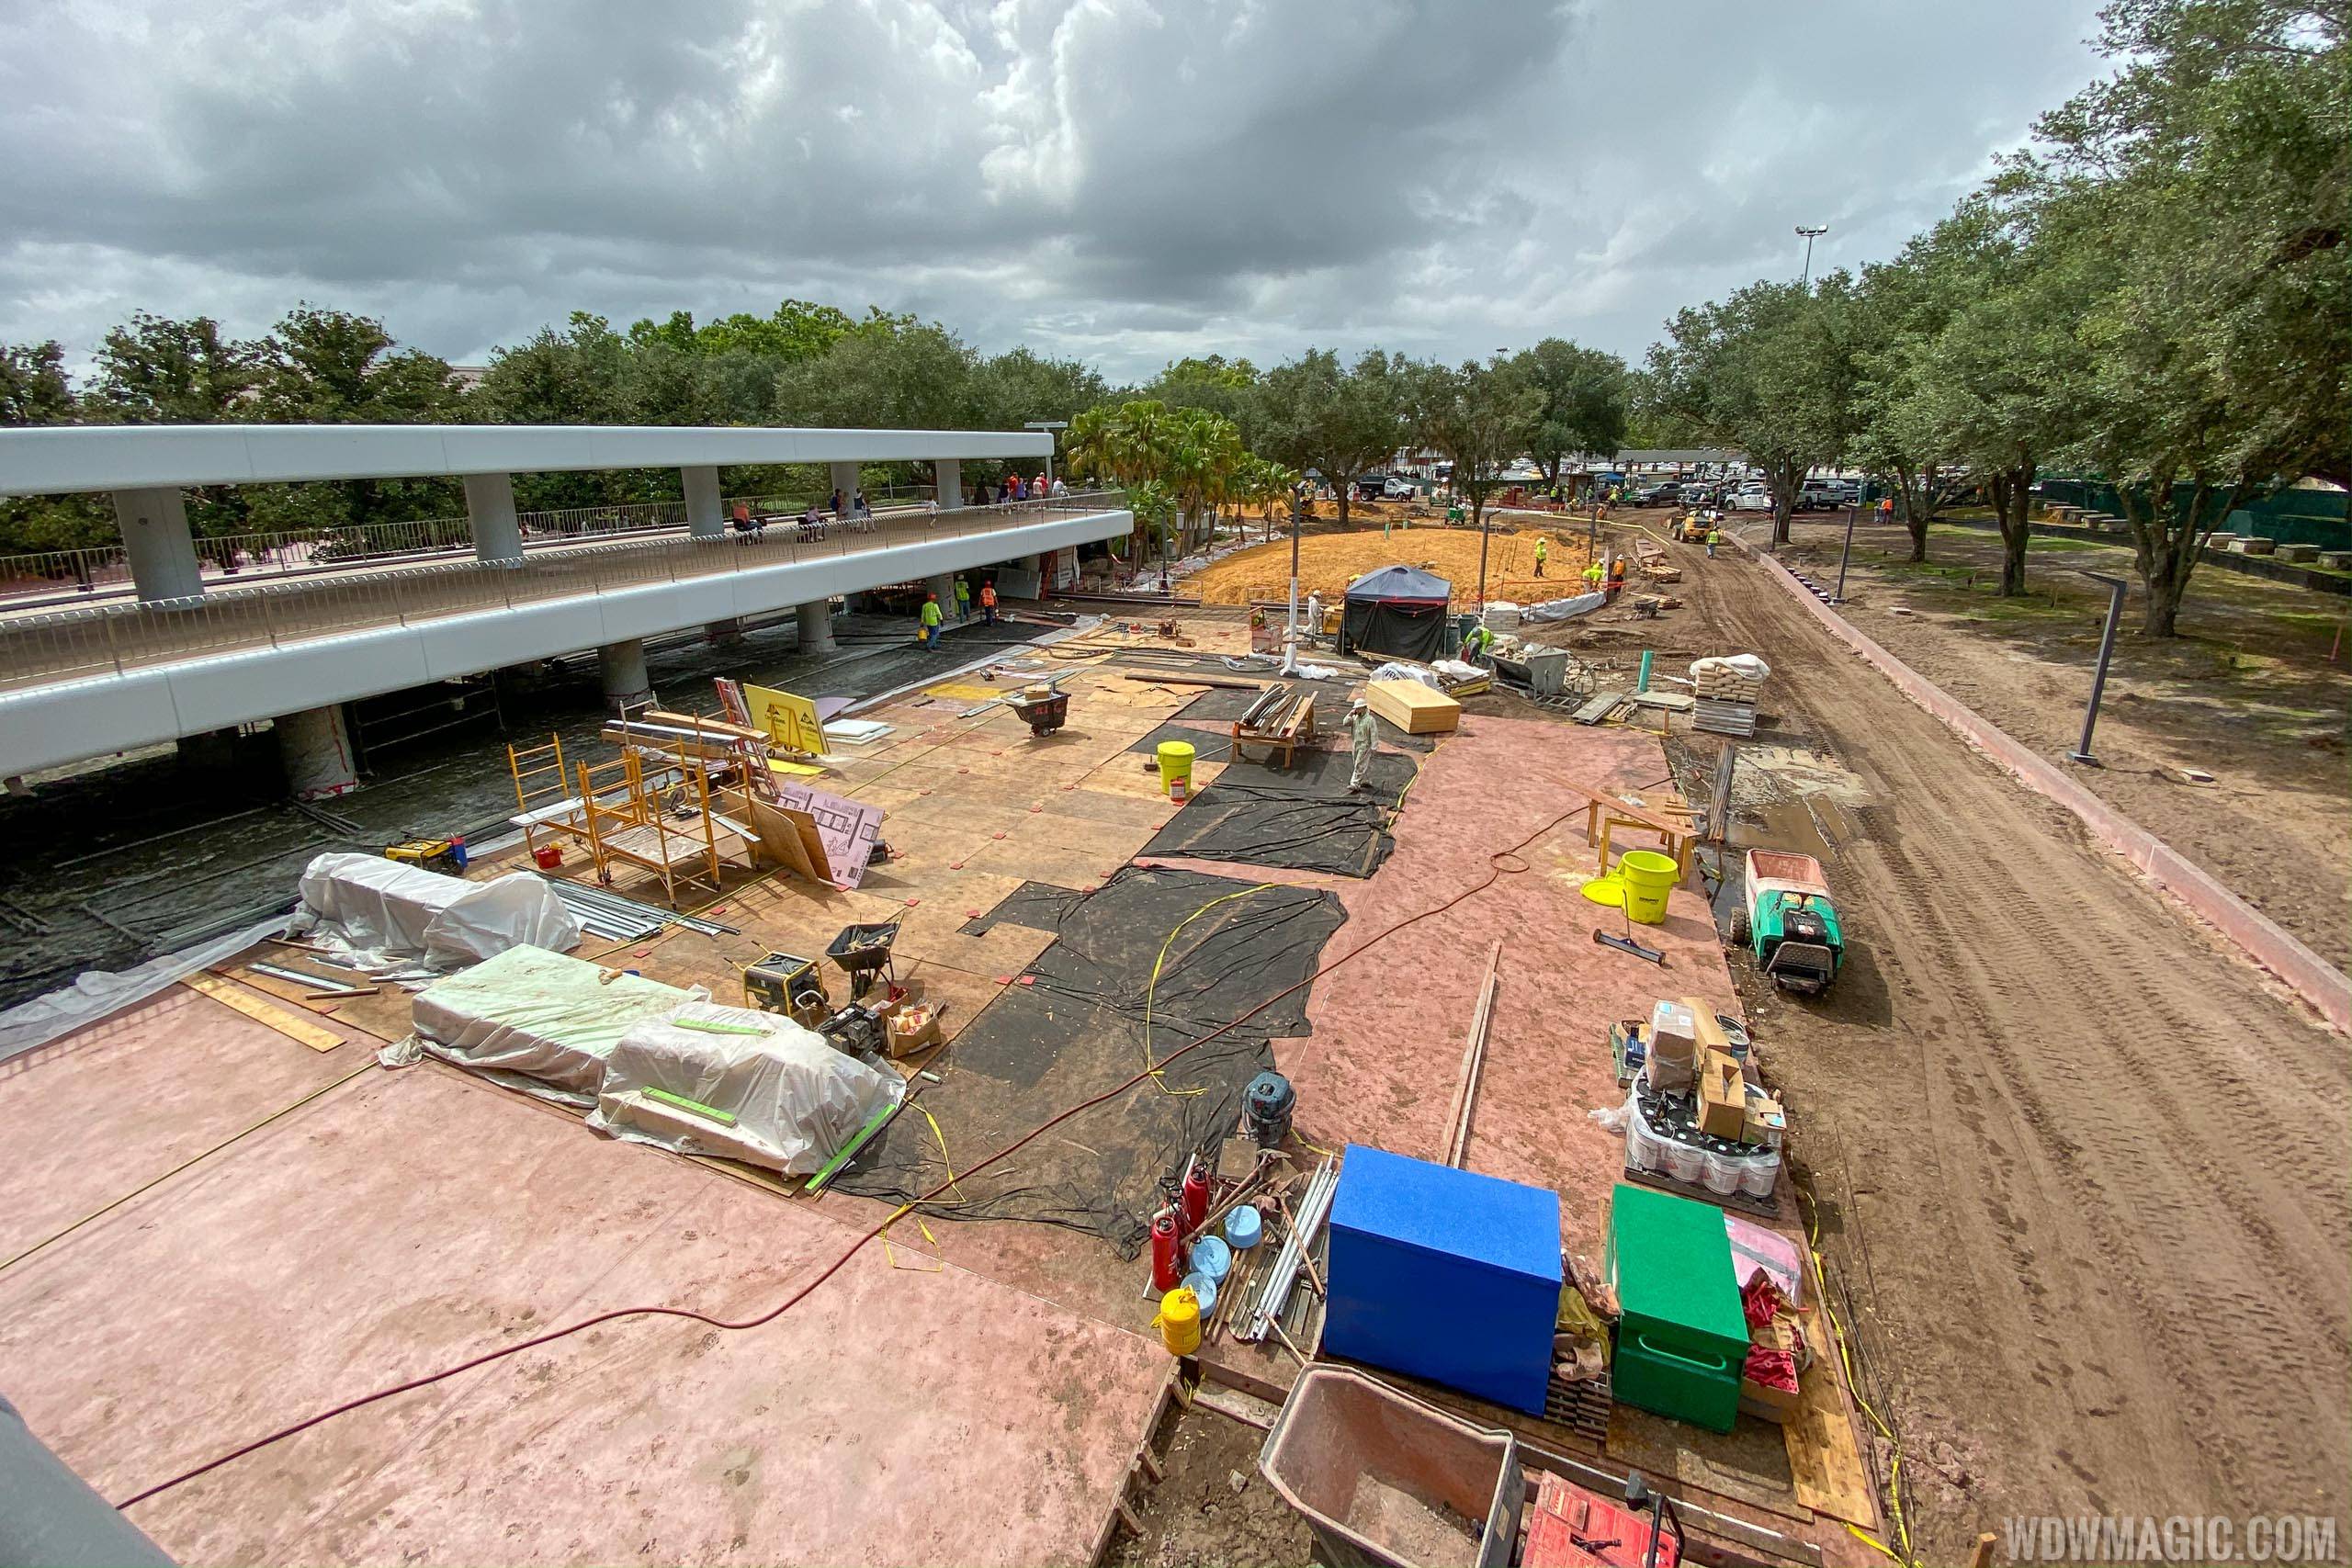 Epcot arrival area October 2019 - New entrance area and bag check